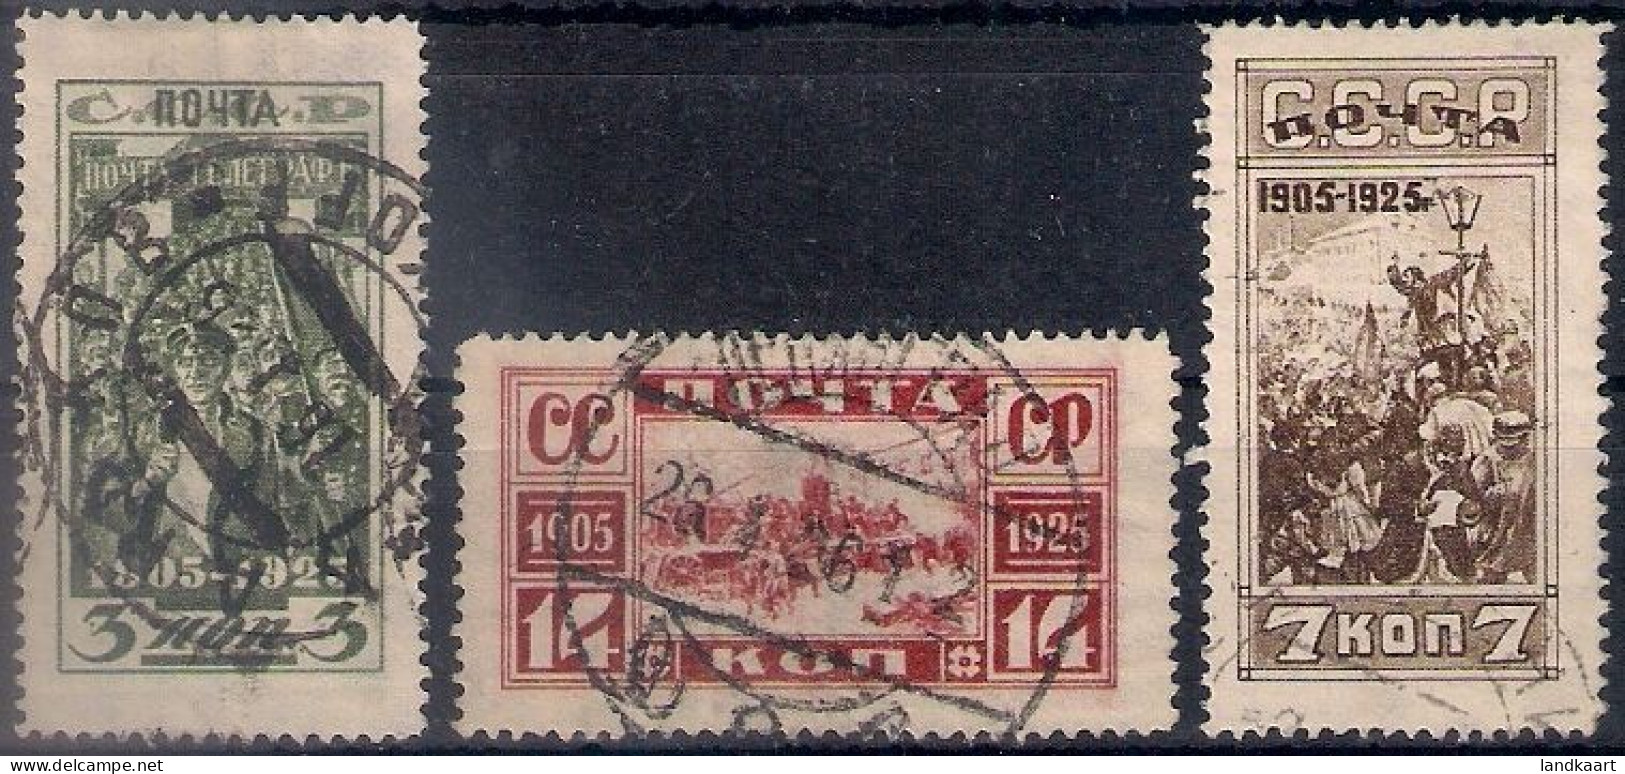 Russia 1925, Michel Nr 302C-04C, Used - Used Stamps